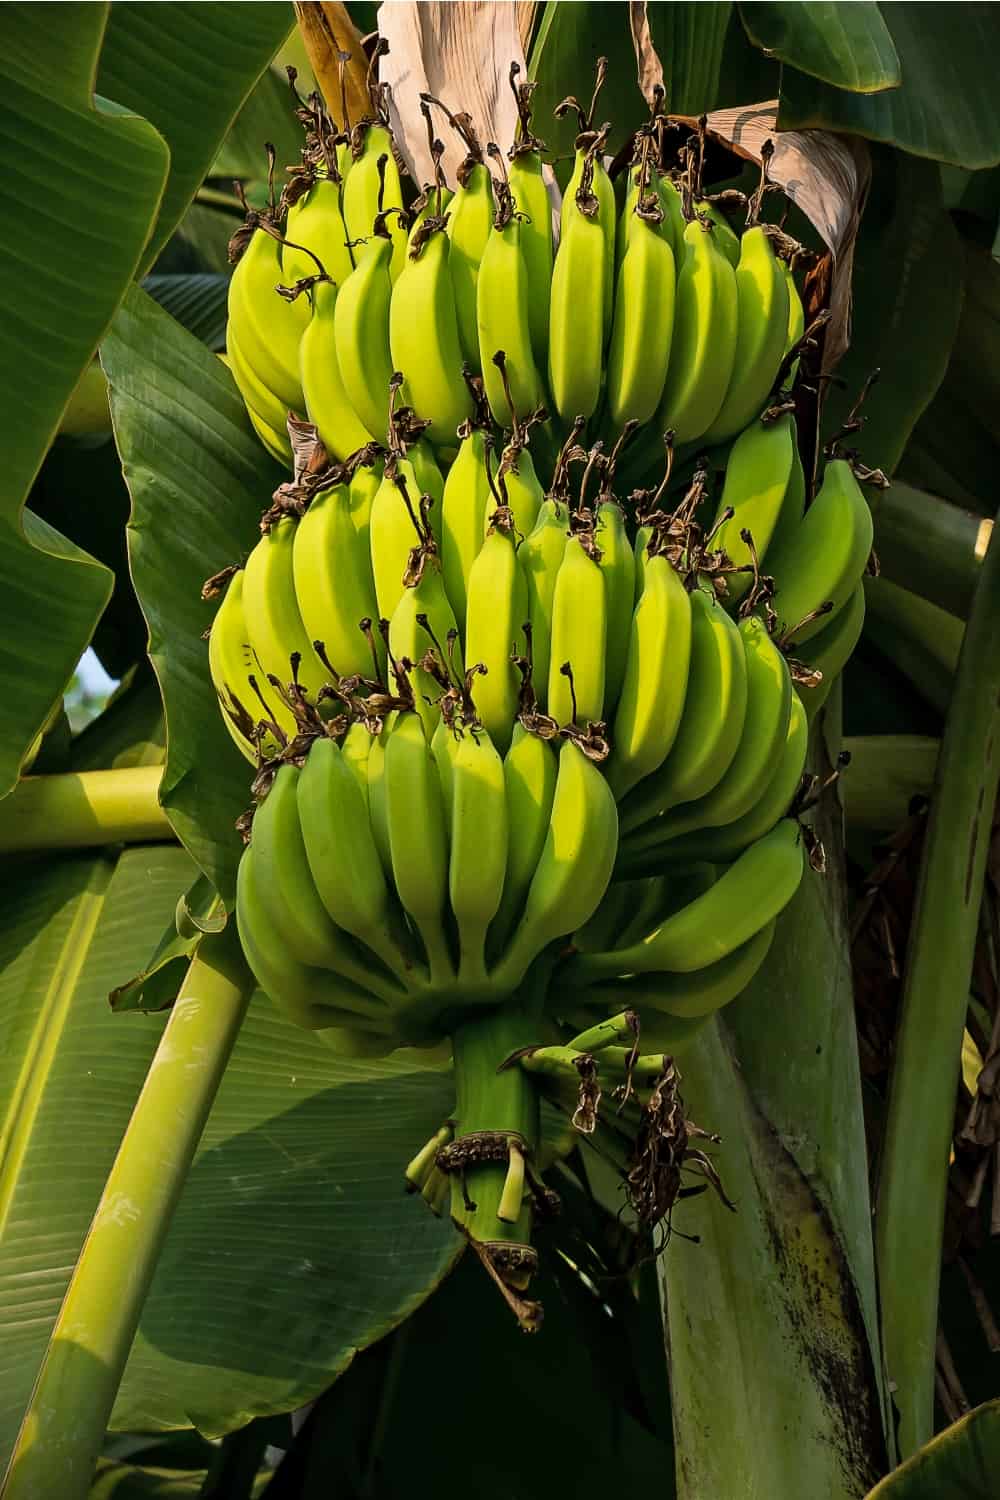 wild bananas growing on the tree in the forest